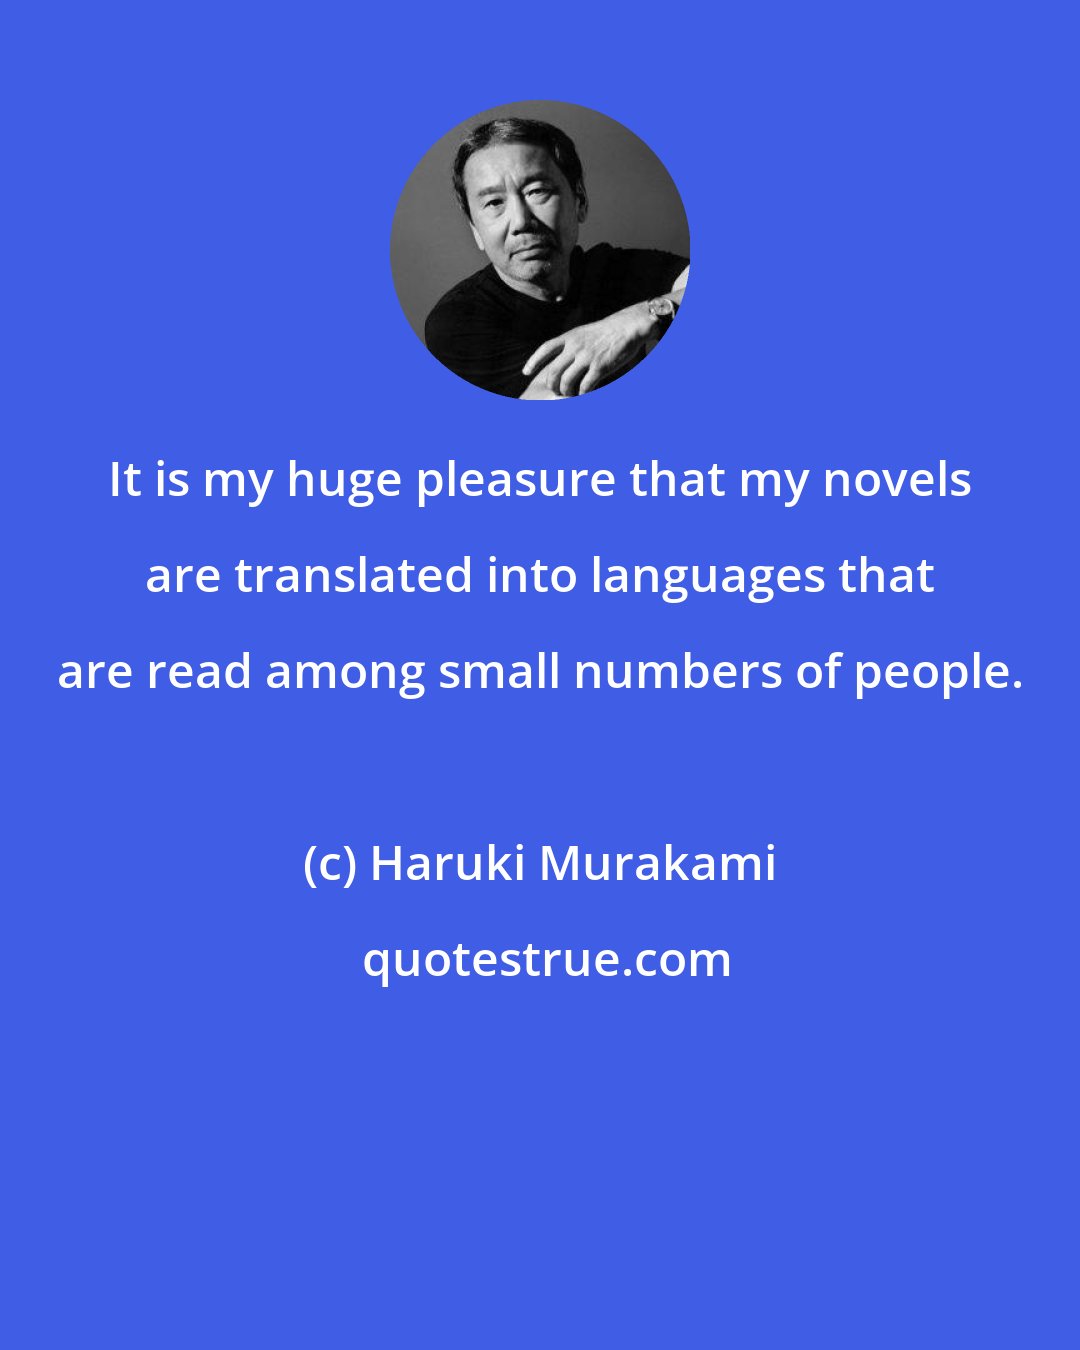 Haruki Murakami: It is my huge pleasure that my novels are translated into languages that are read among small numbers of people.